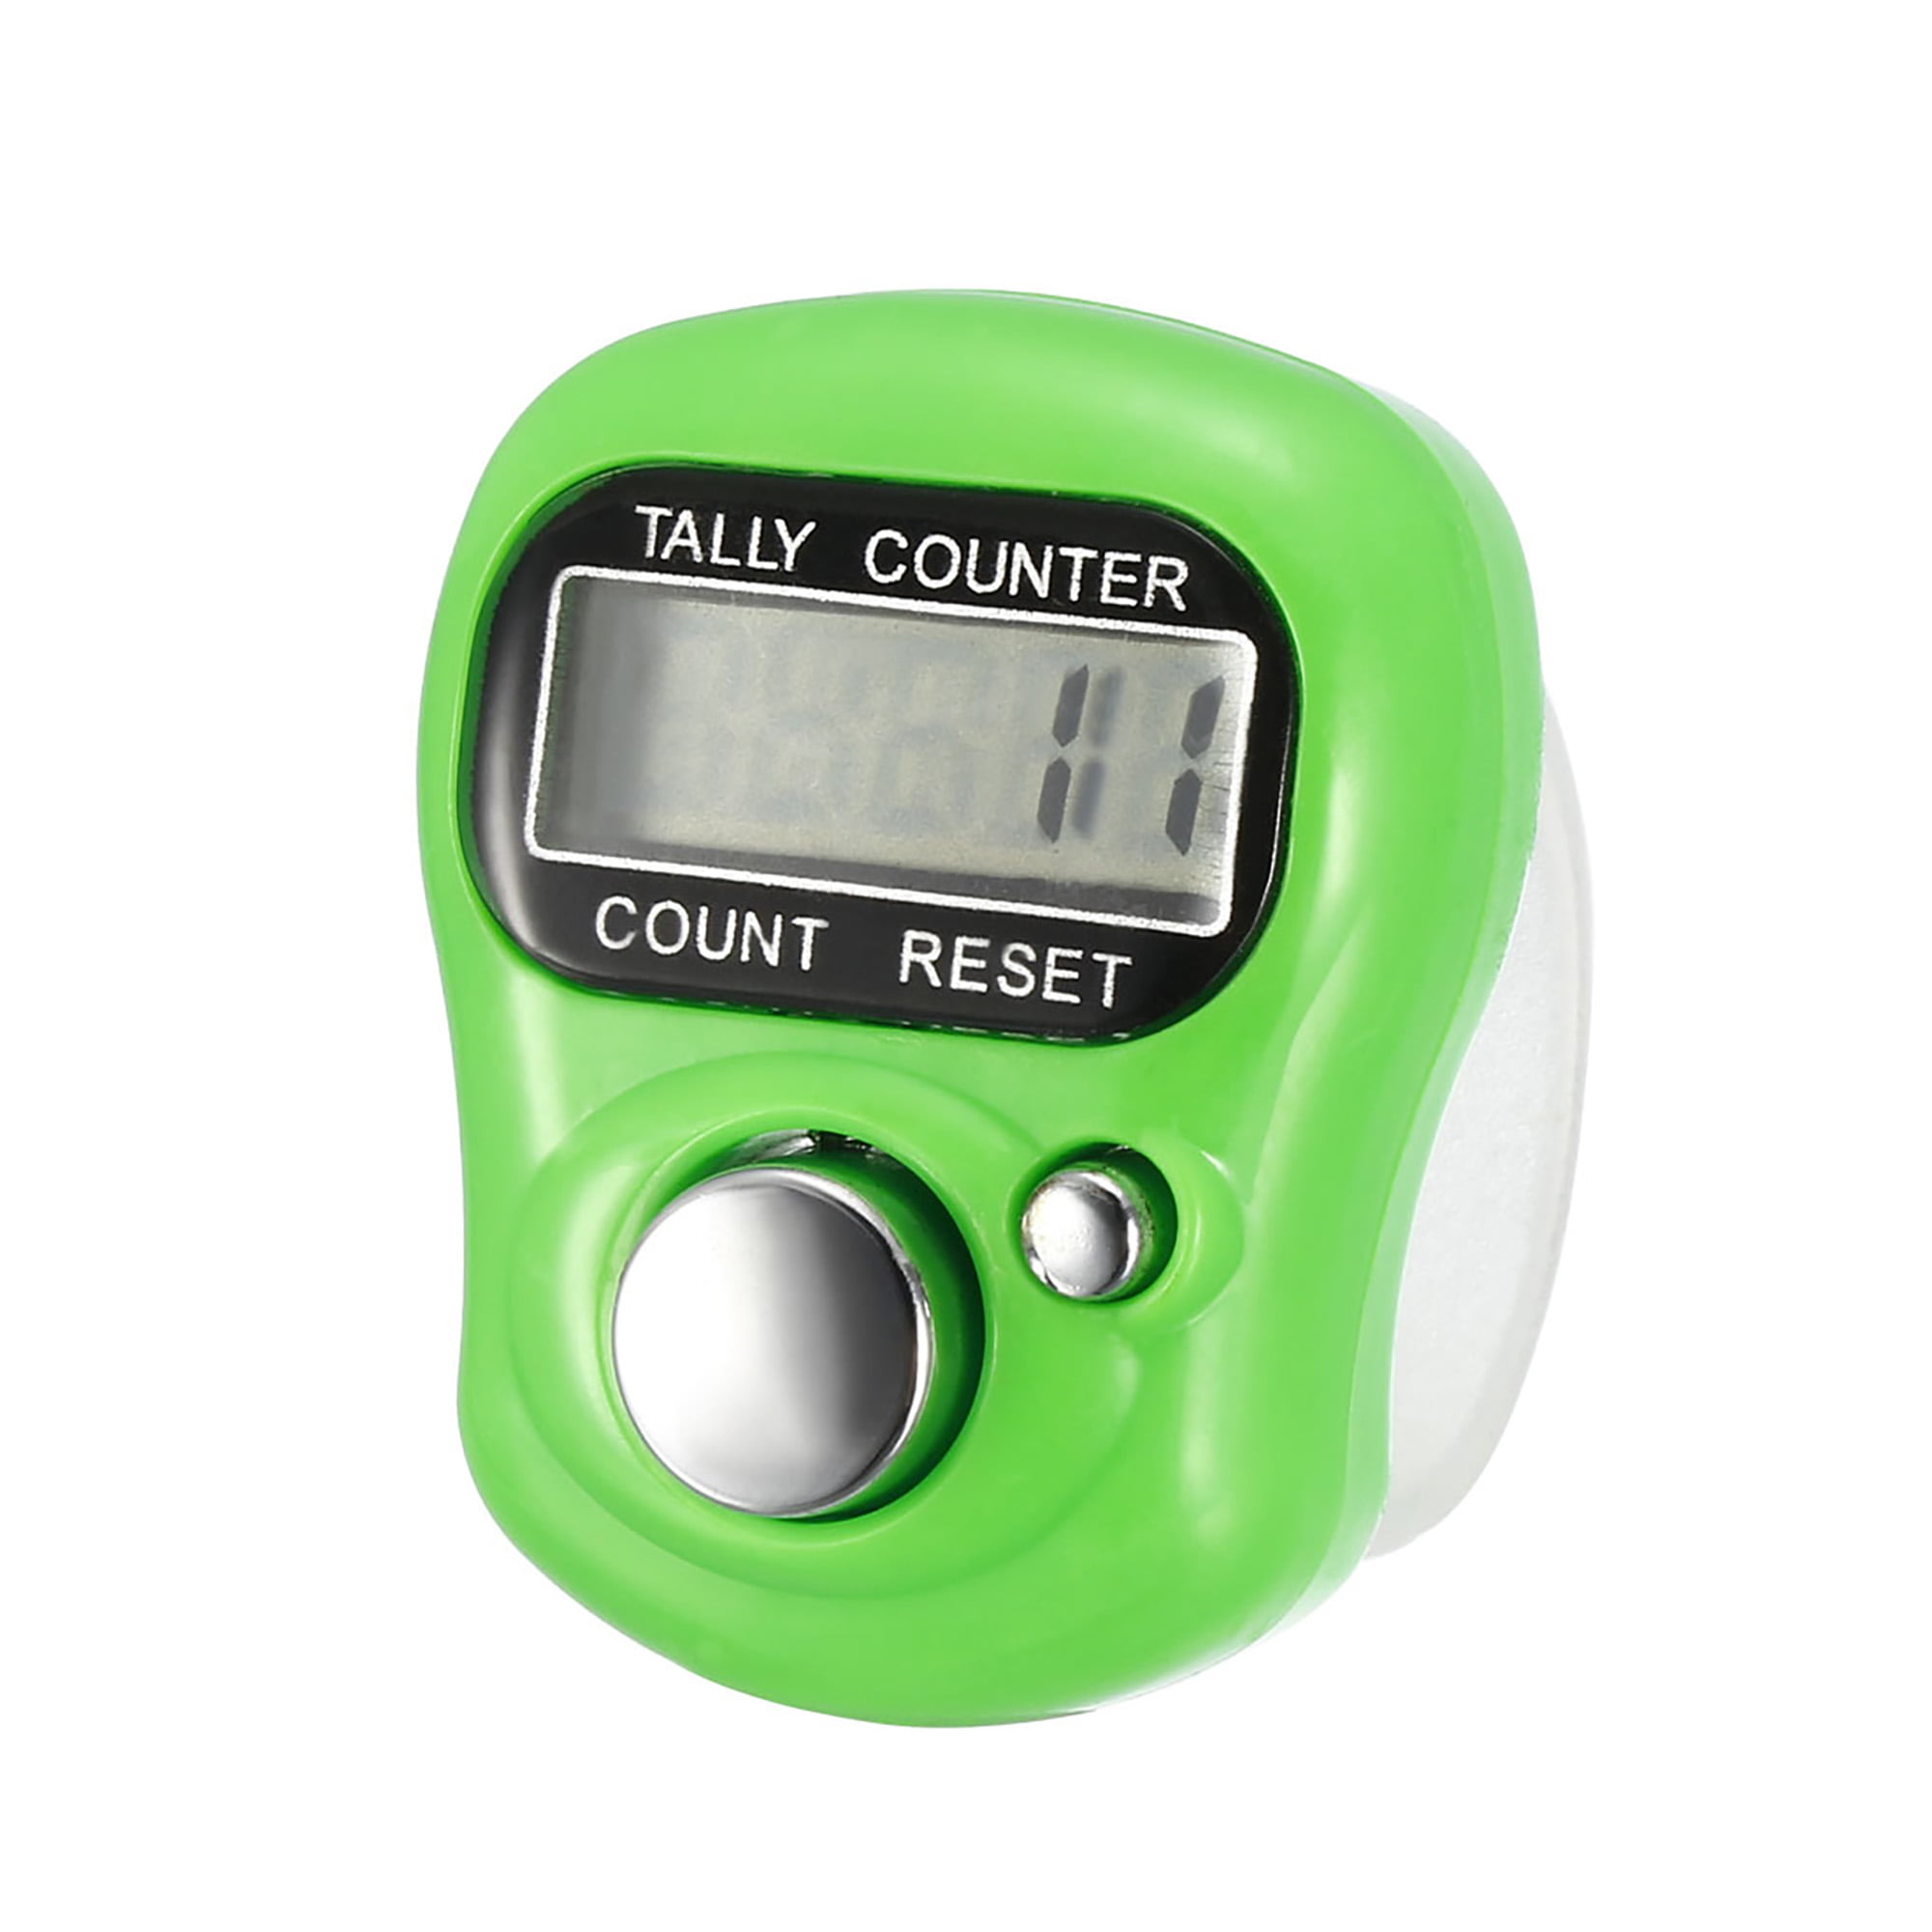 5 Pieces Hand Tally Counter 0-99999 5 Digital Finger Counter Clickers Resettable Lap Counter Handheld Mechanical Number Click Counter 